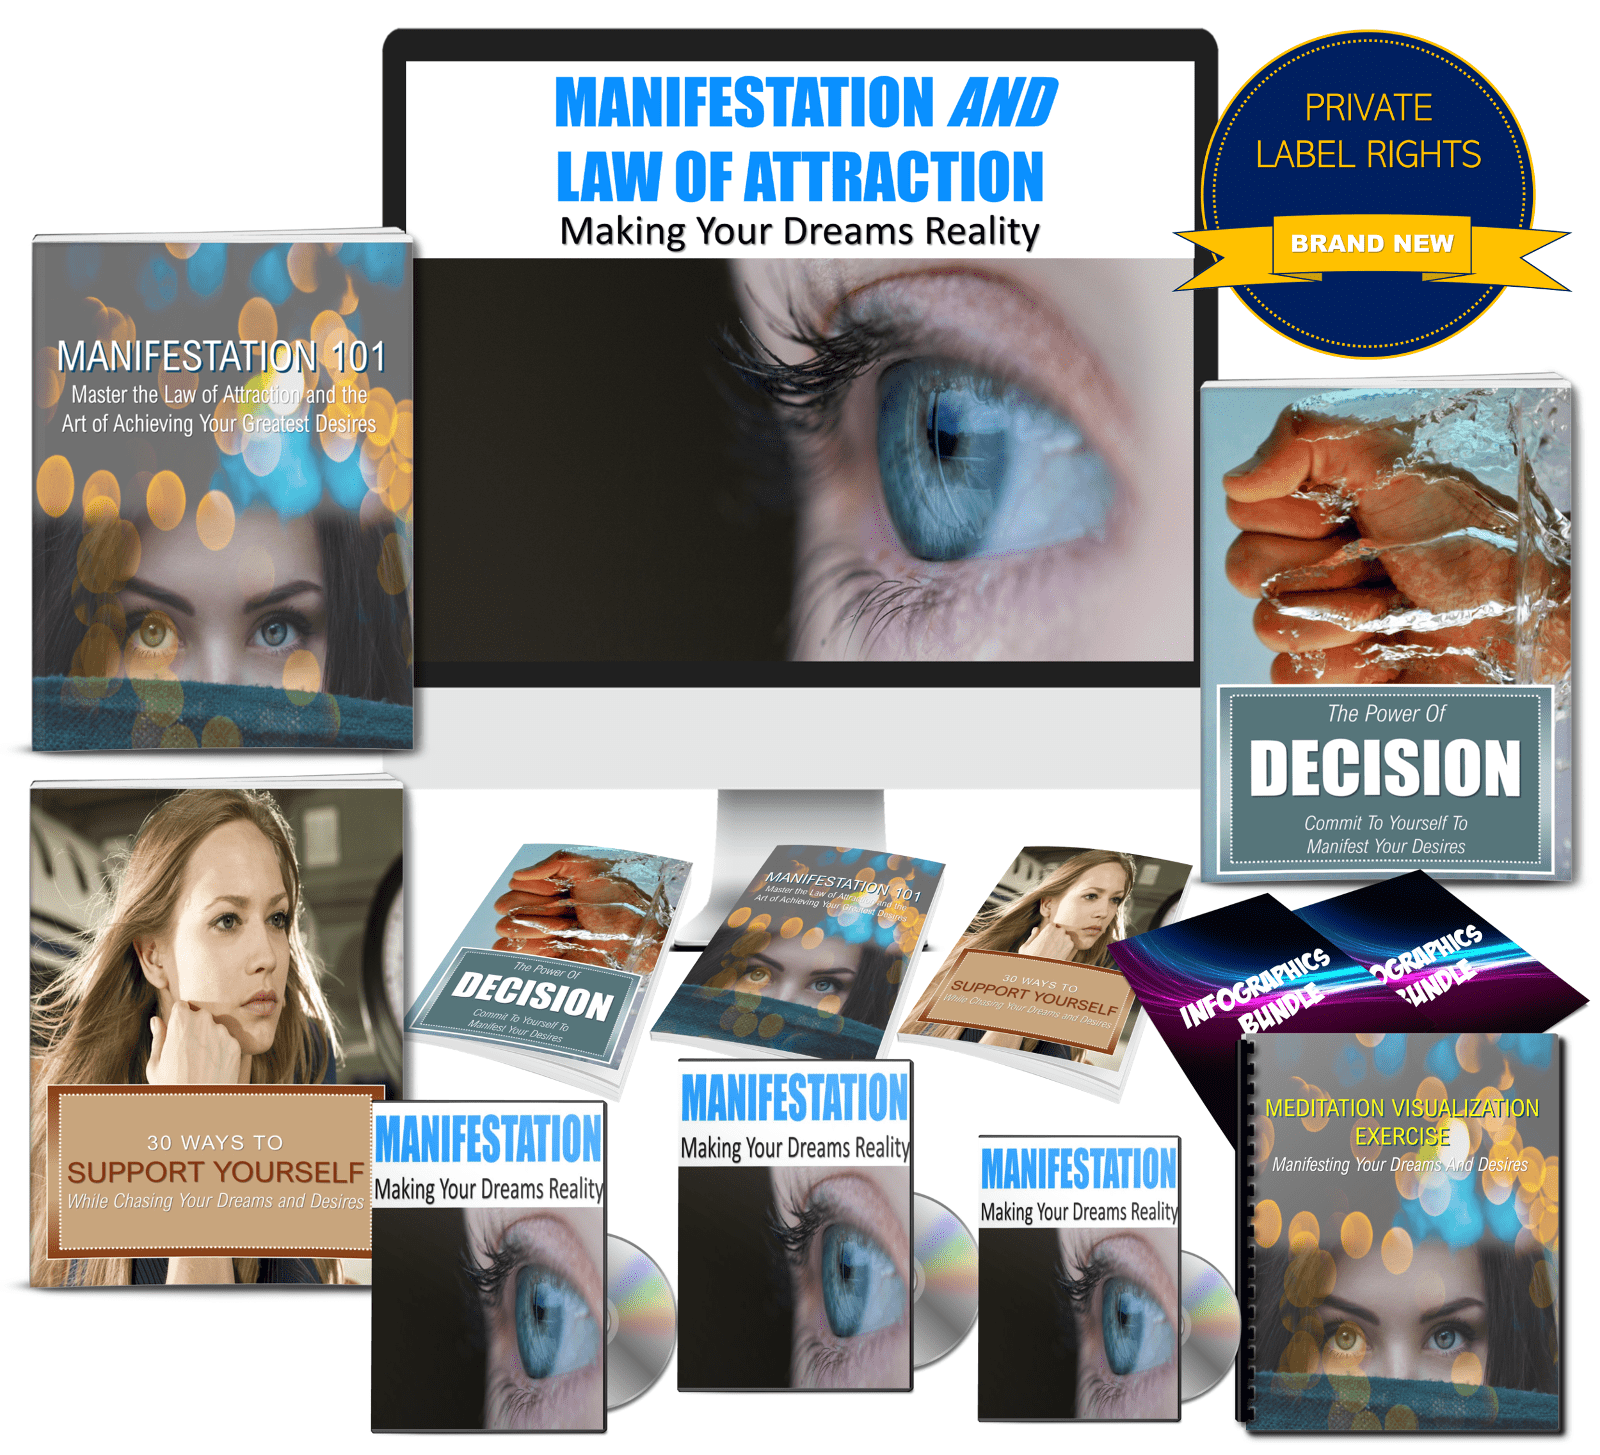 Manifestation and Law Of Attraction Content - PLR Rights